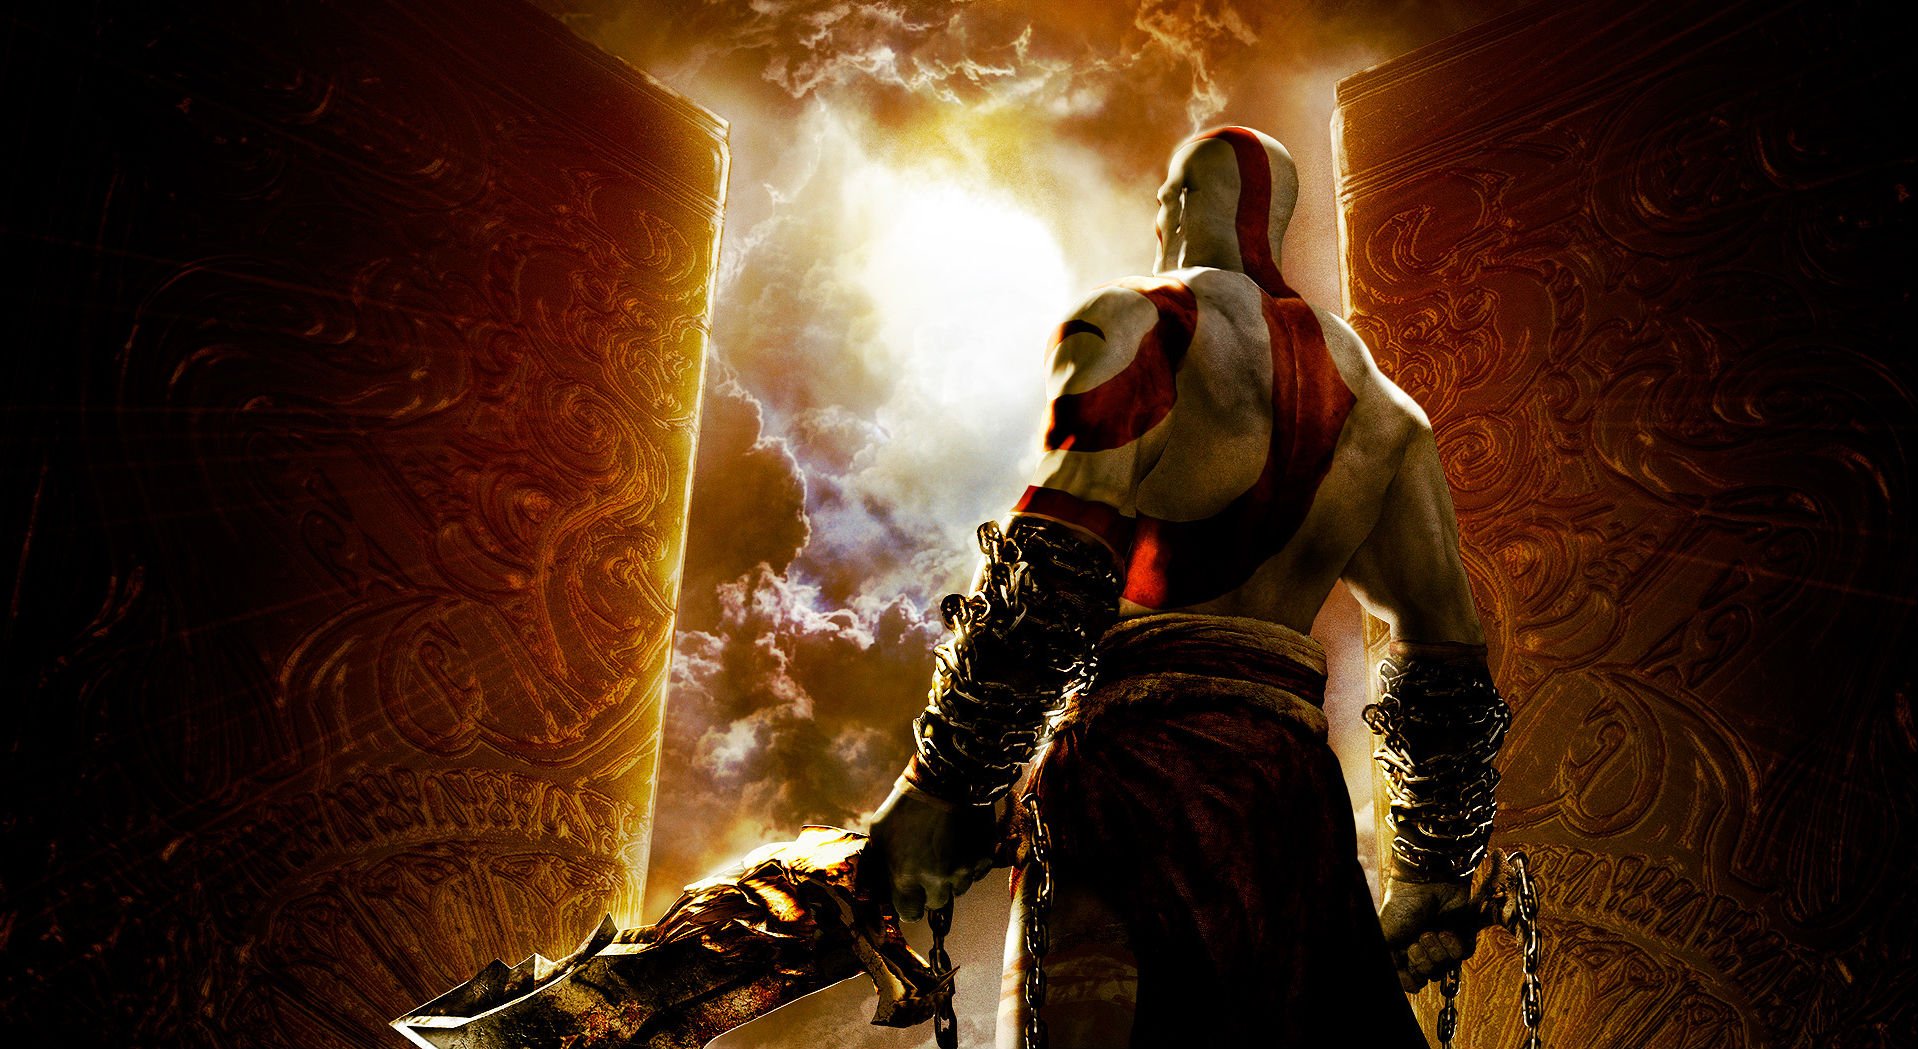 4 God of War: Chains of Olympus HD Wallpapers | Background Images - Wallpaper Abyss